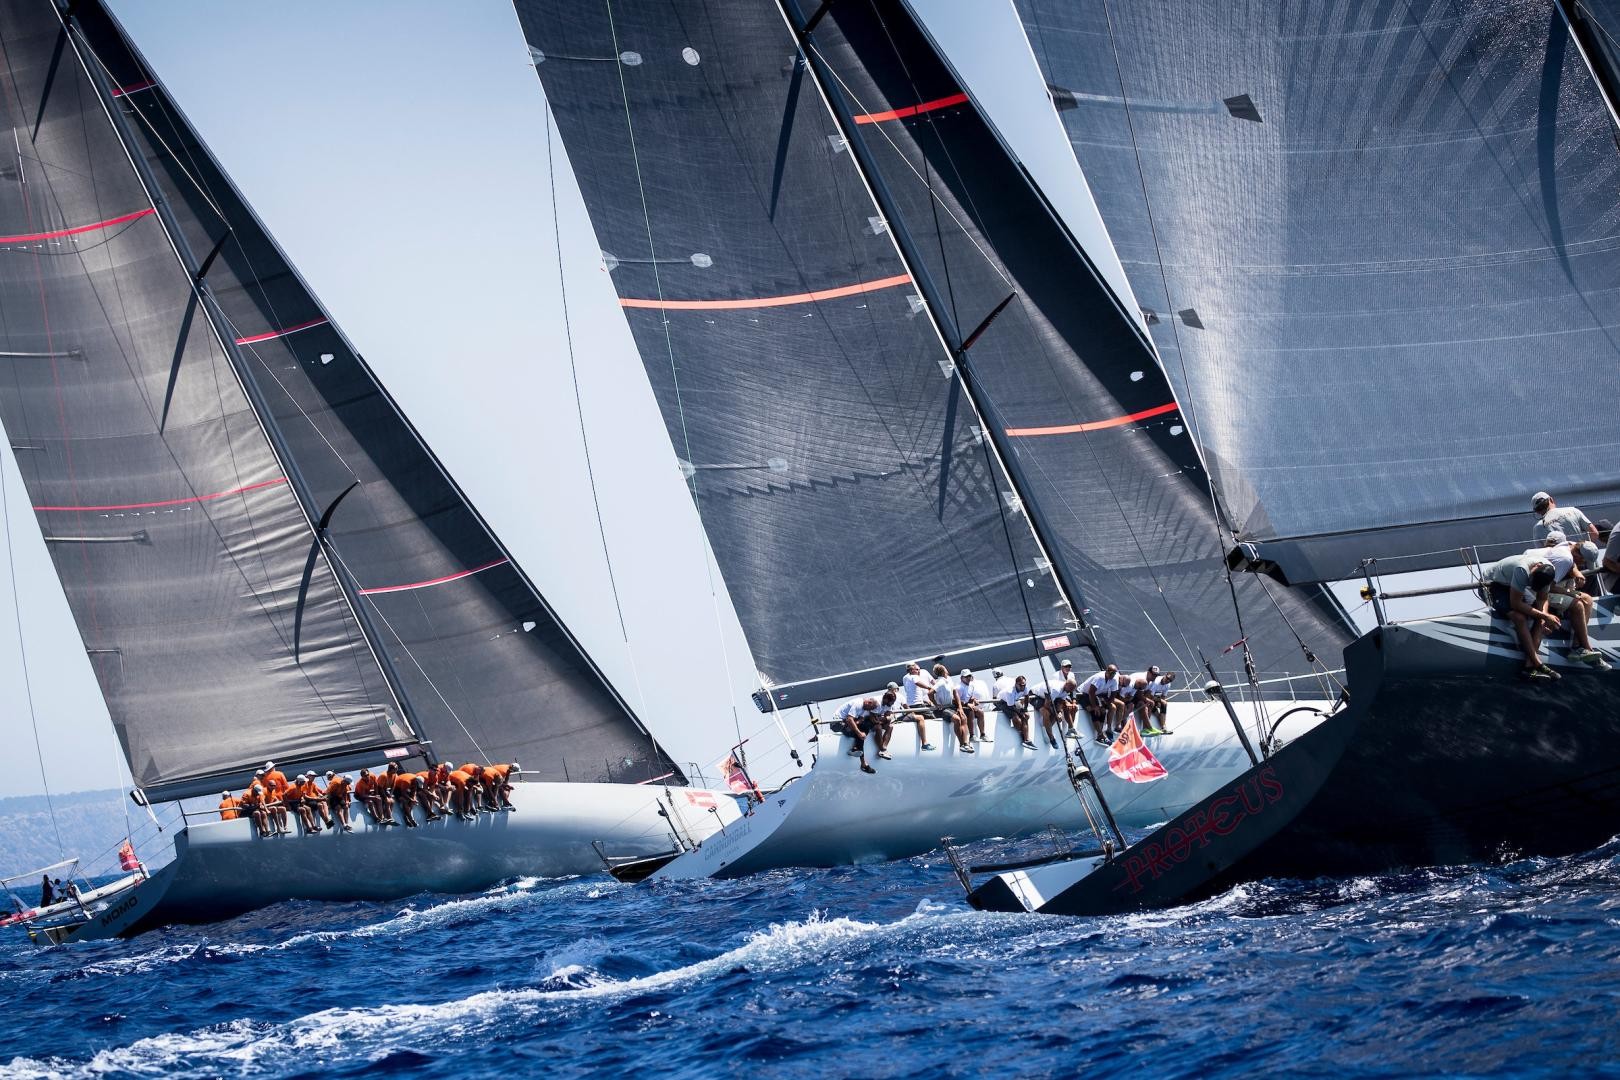 The Mallorca Sotheby’s IRC class, a meeting of the ‘big boats’ at the 38 Copa del Rey MAPFRE